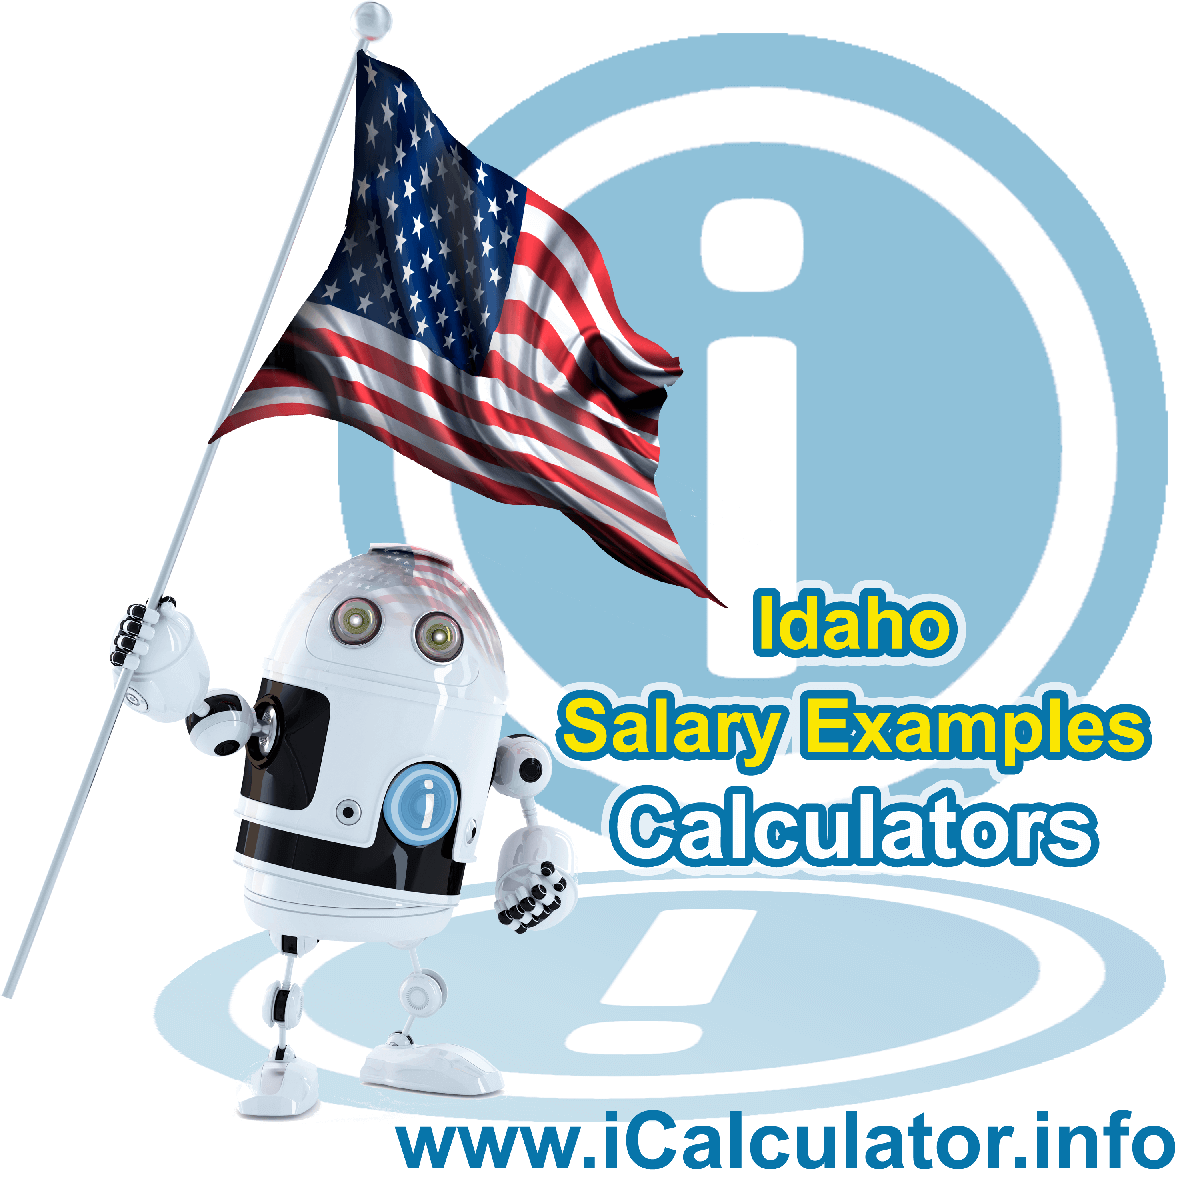 Idaho Salary Example for $50,000.00 in 2022 | iCalculator™ | $50,000.00 salary example for employee and employer paying Idaho State tincome taxes. Detailed salary after tax calculation including Idaho State Tax, Federal State Tax, Medicare Deductions, Social Security, Capital Gains and other income tax and salary deductions complete with supporting Idaho state tax tables 